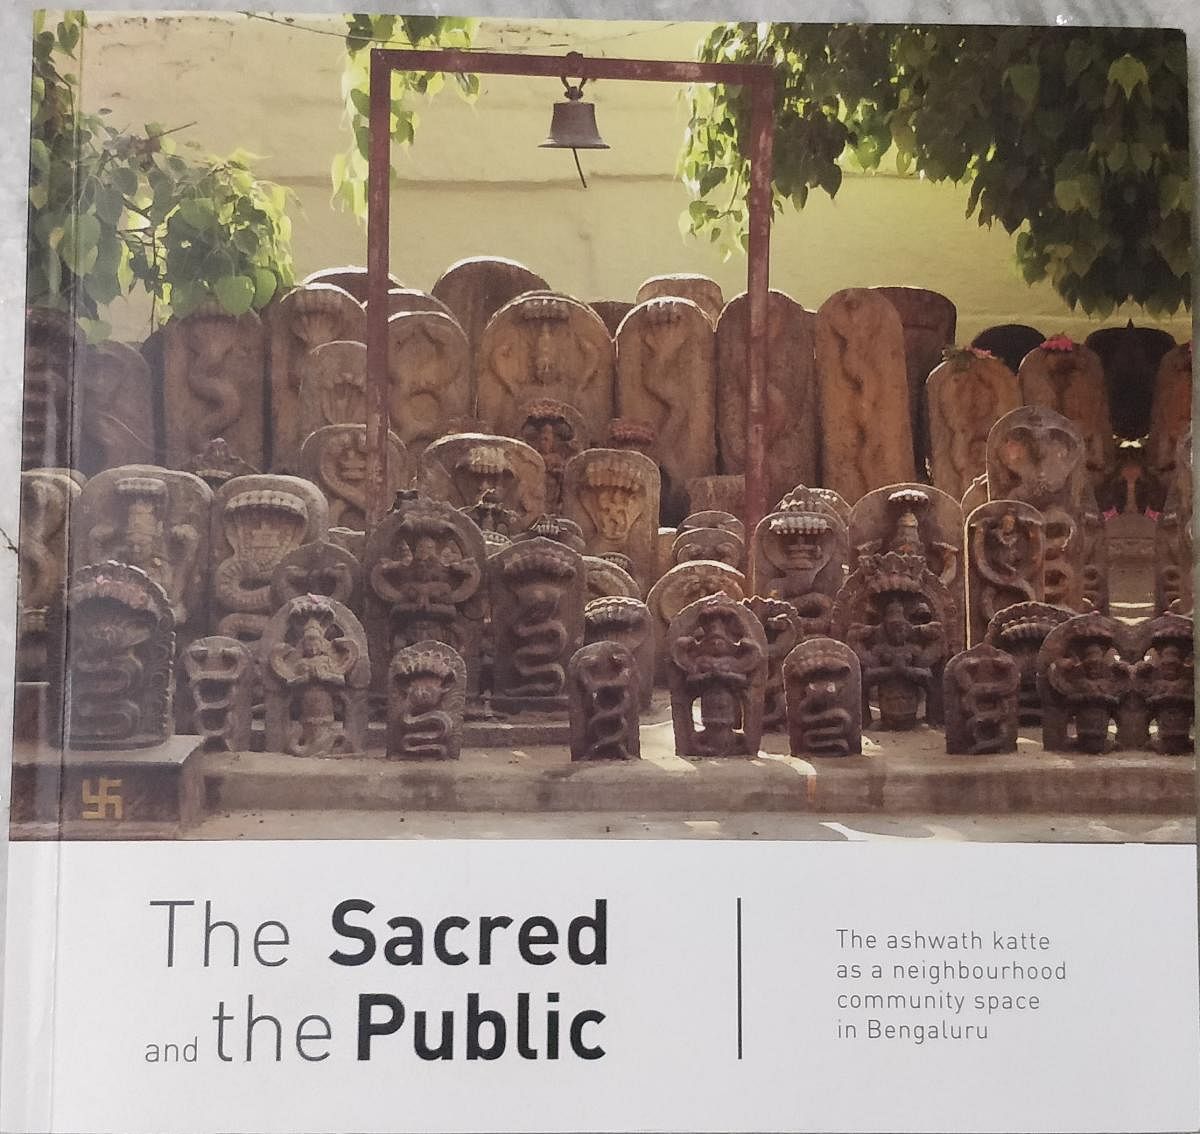 The book ‘The Sacred and the Public’ is a culmination of the project on ashwath kattes.